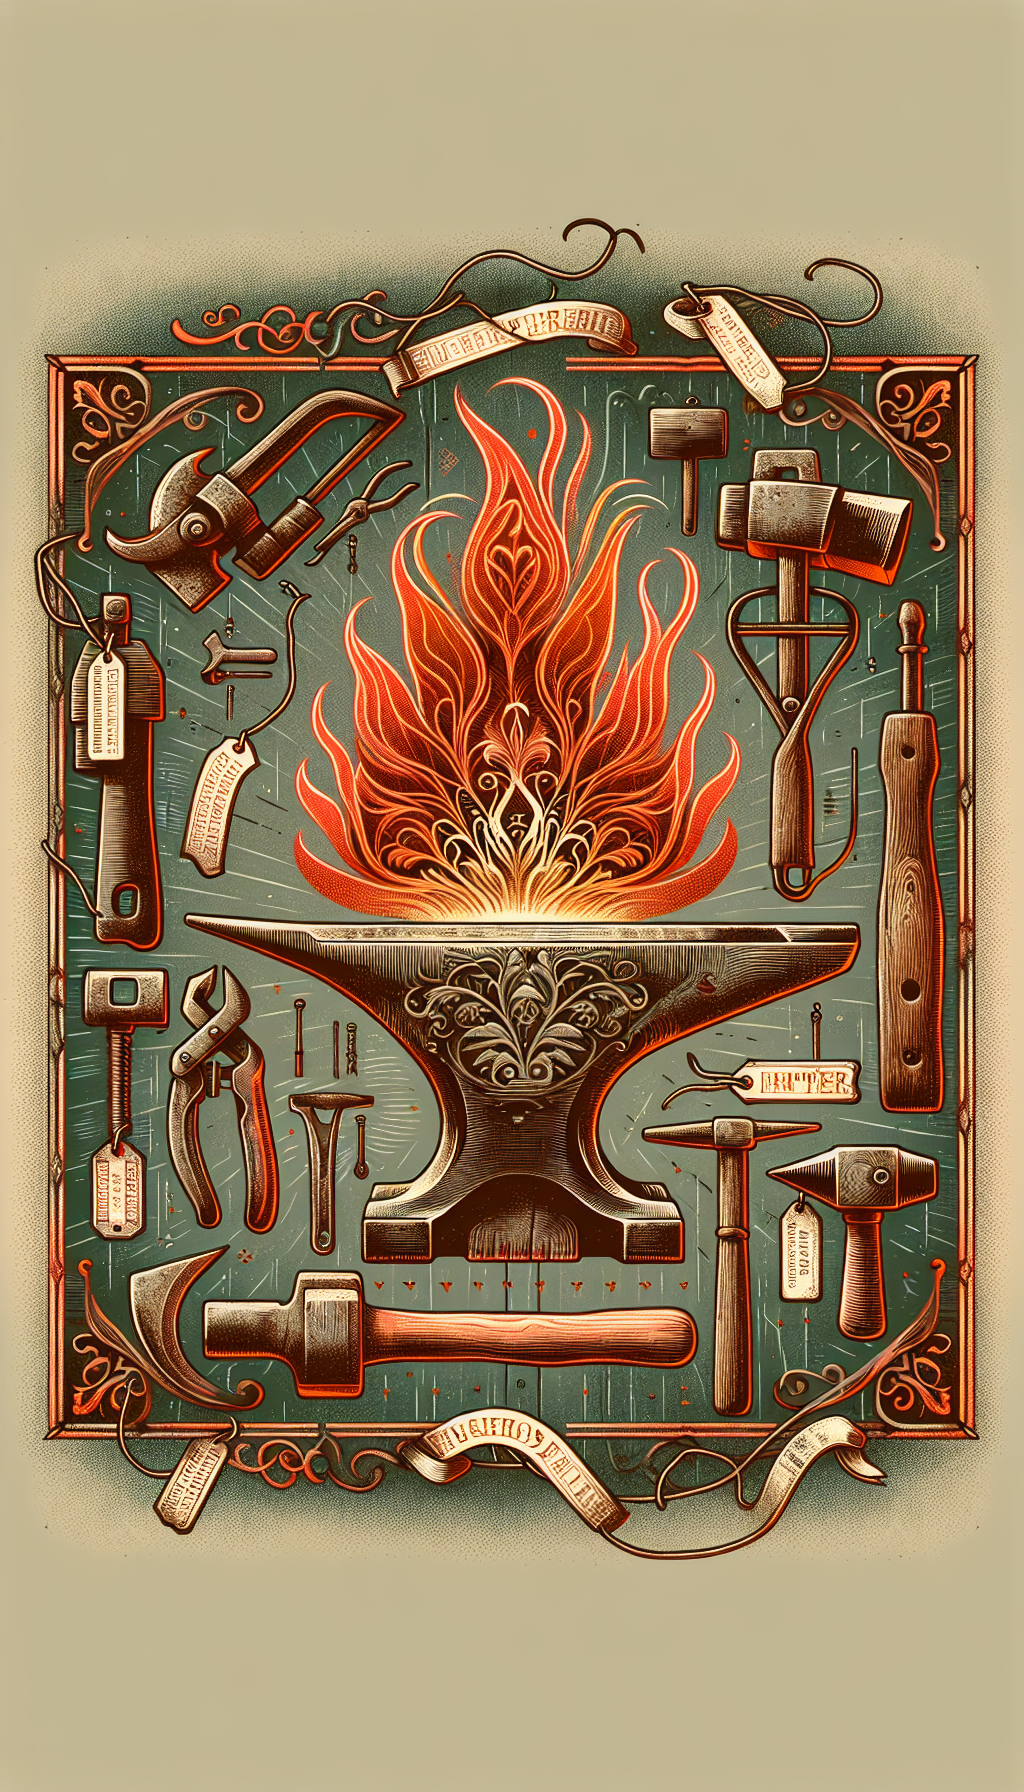 An intricate illustration merges the rustic textures of a farm with the fiery ambience of a forge. At its center, an archaic, ornate plowshare transitions seamlessly into a blacksmith’s anvil where a forge hammer morphs into a unique, unidentifiable antique tool. Whimsical identification tags dangle from each item, inviting the viewer to discover their arcane purposes.